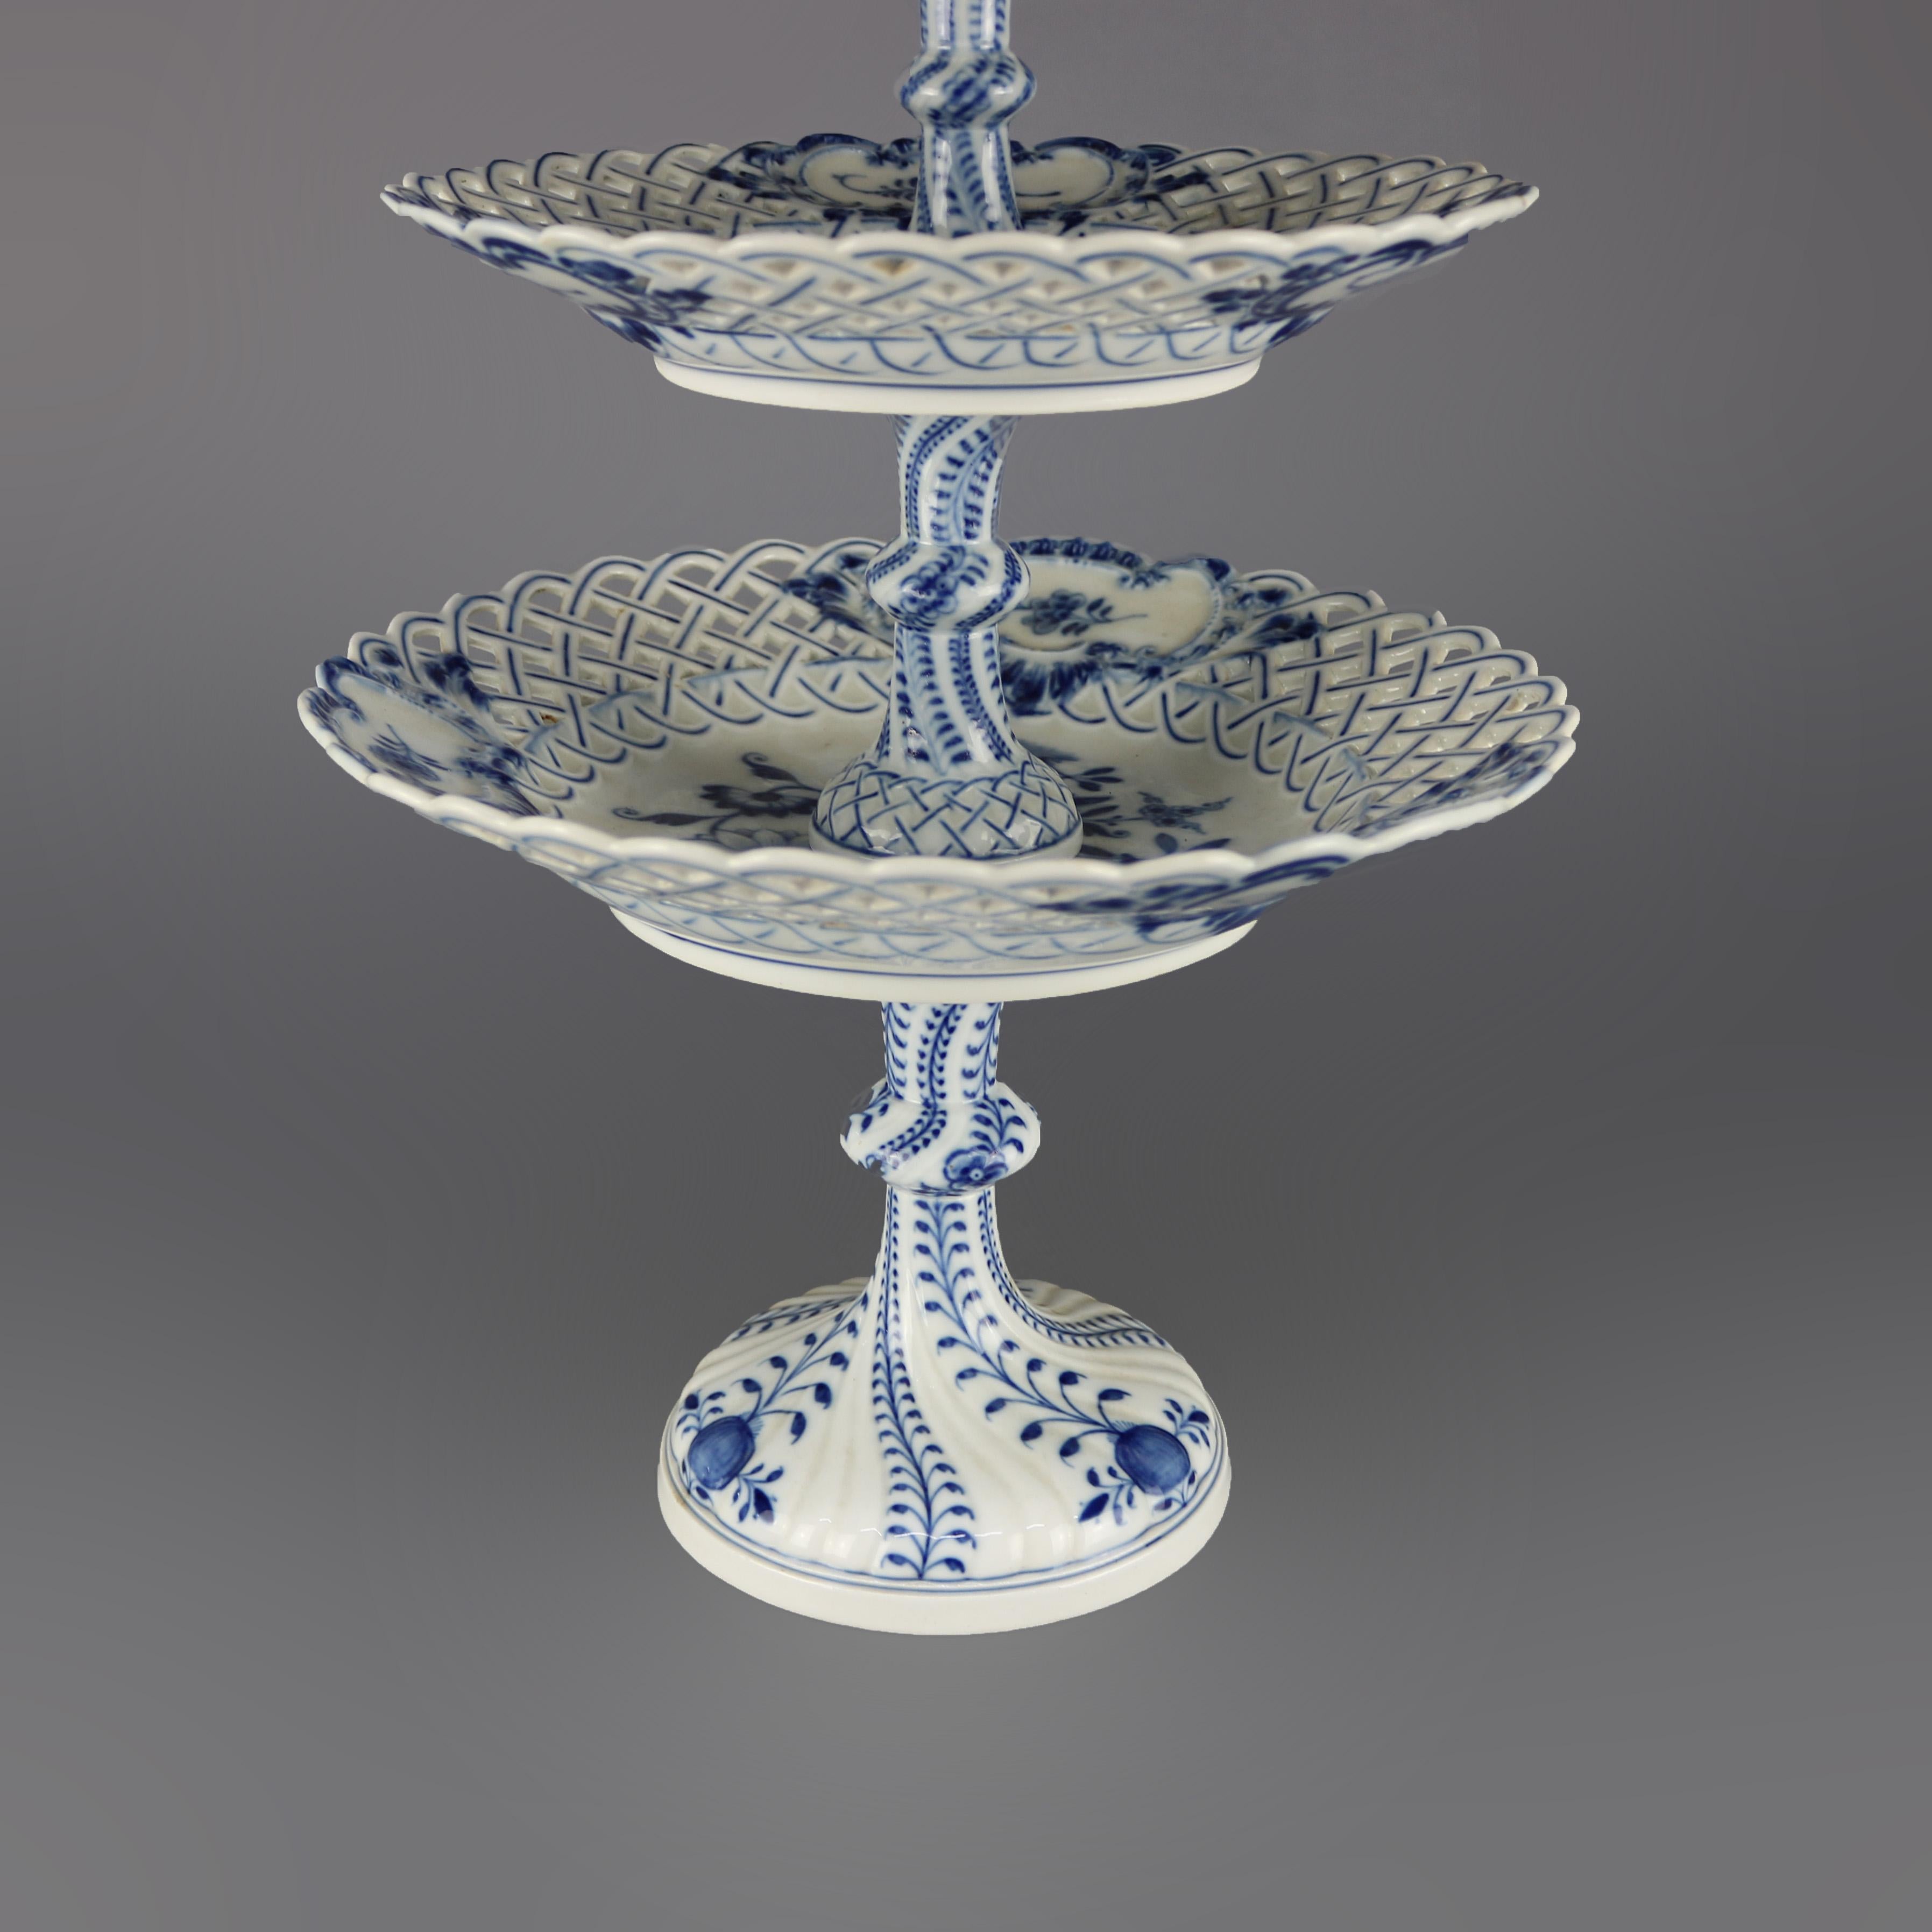 Metal Antique German Meissen Porcelain Reticulated and Tiered Serving Tray, circa 1900